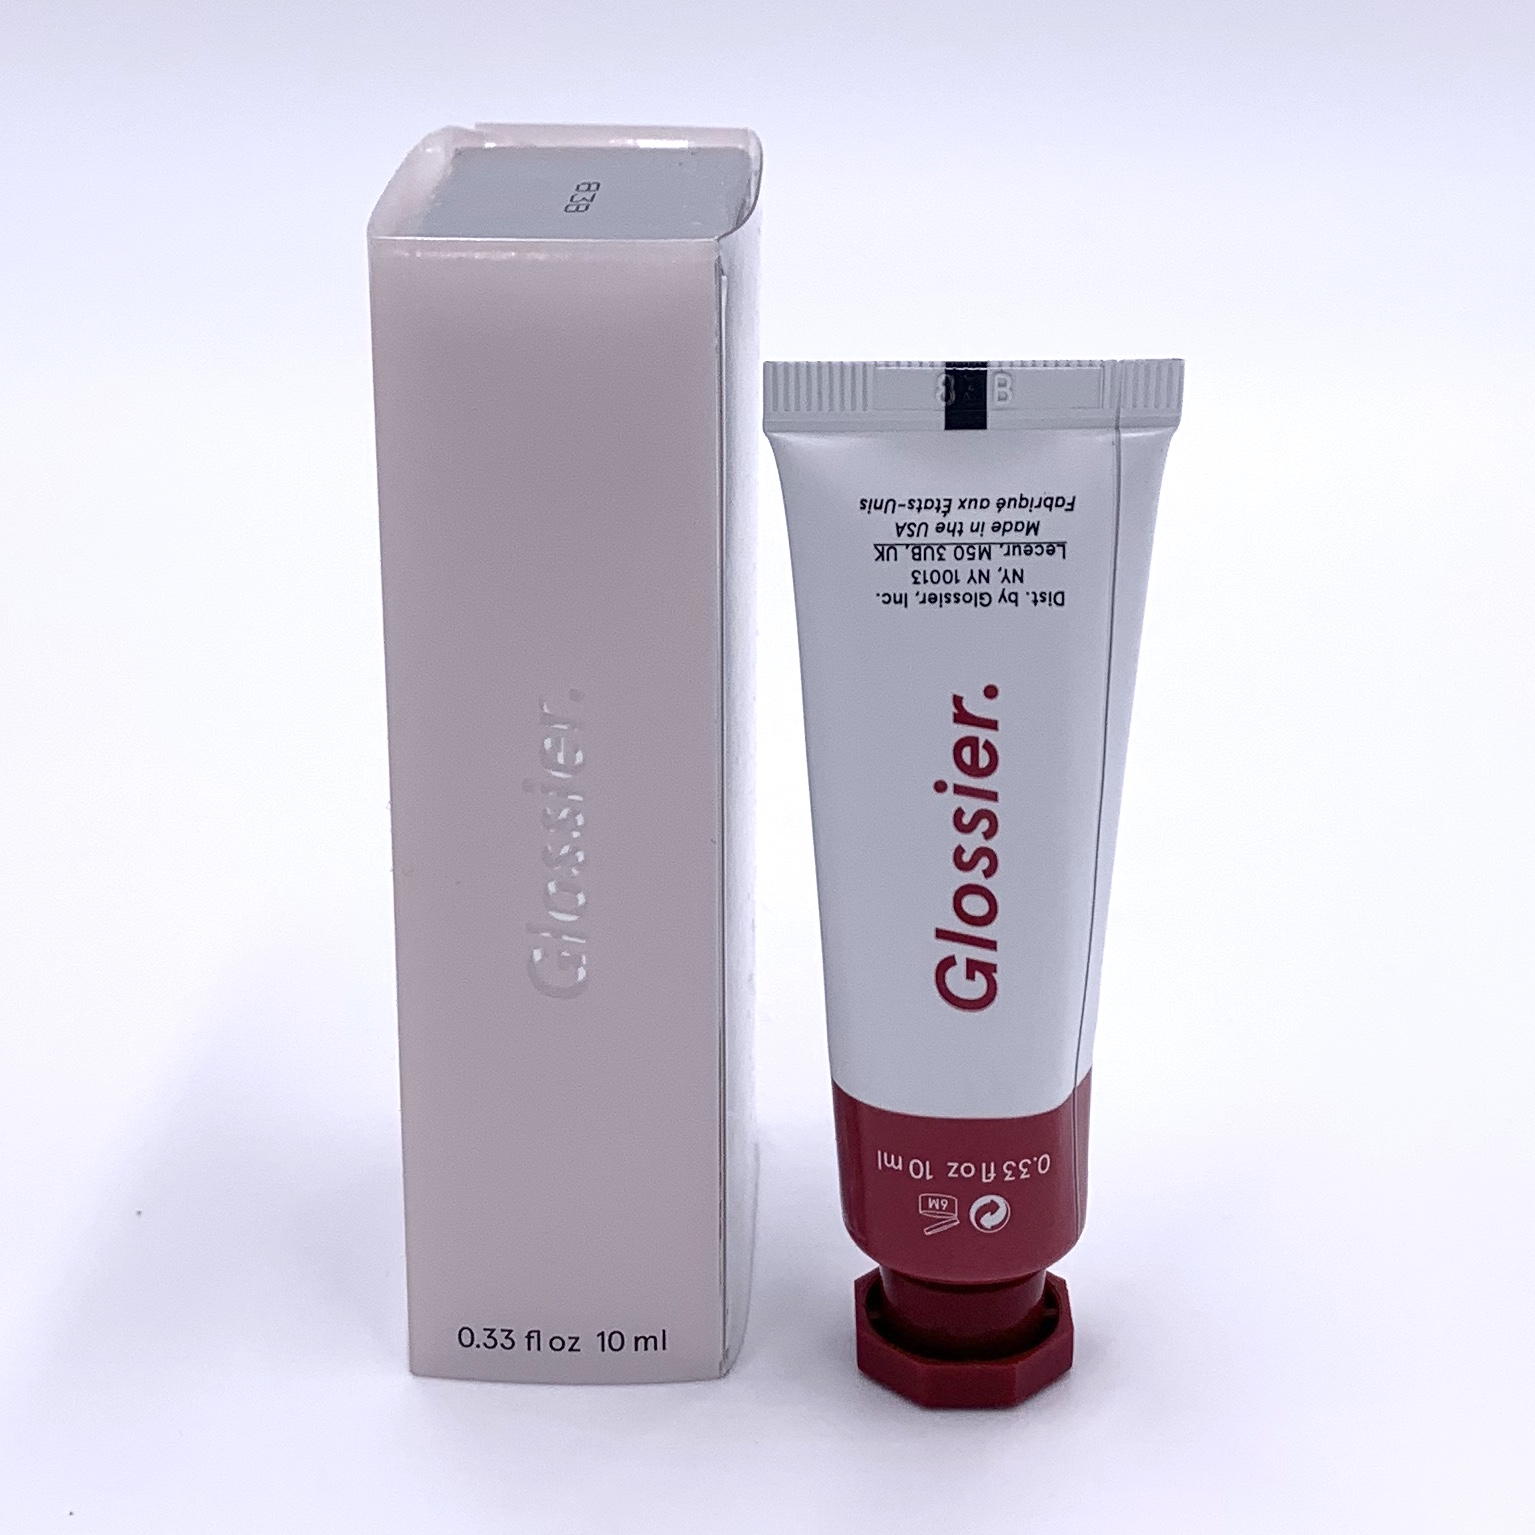 Glossier Cloud Paint Seamless Cheek Color in Storm Back2 for Cocotique September 2020